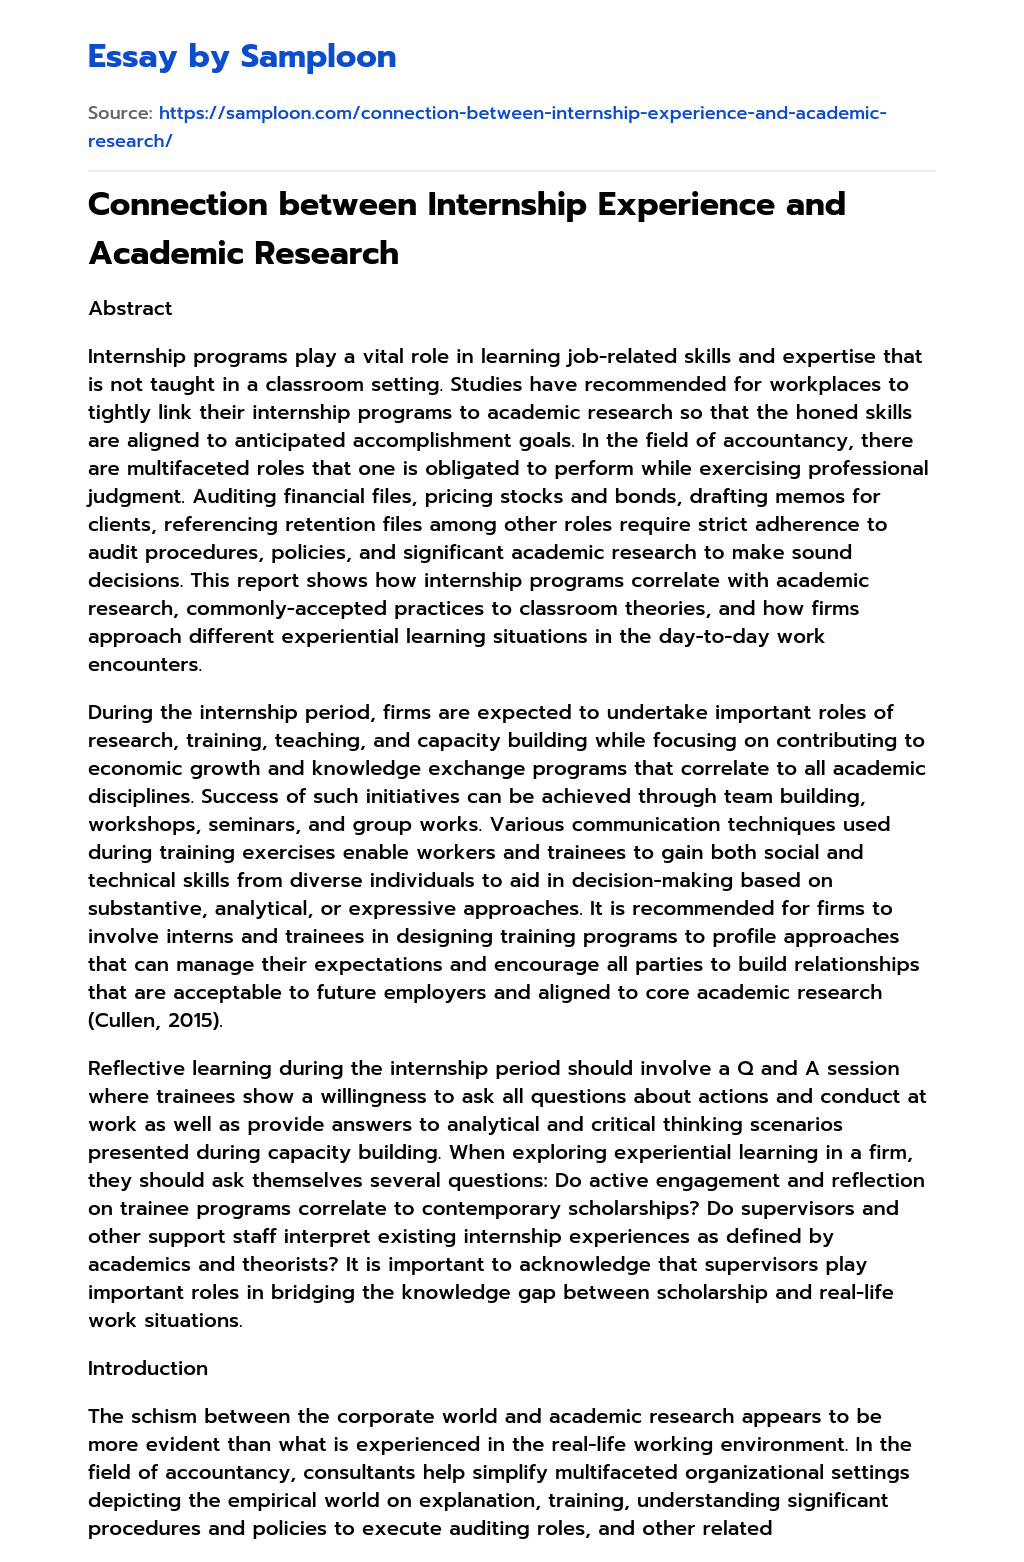 Connection between Internship Experience and Academic Research essay